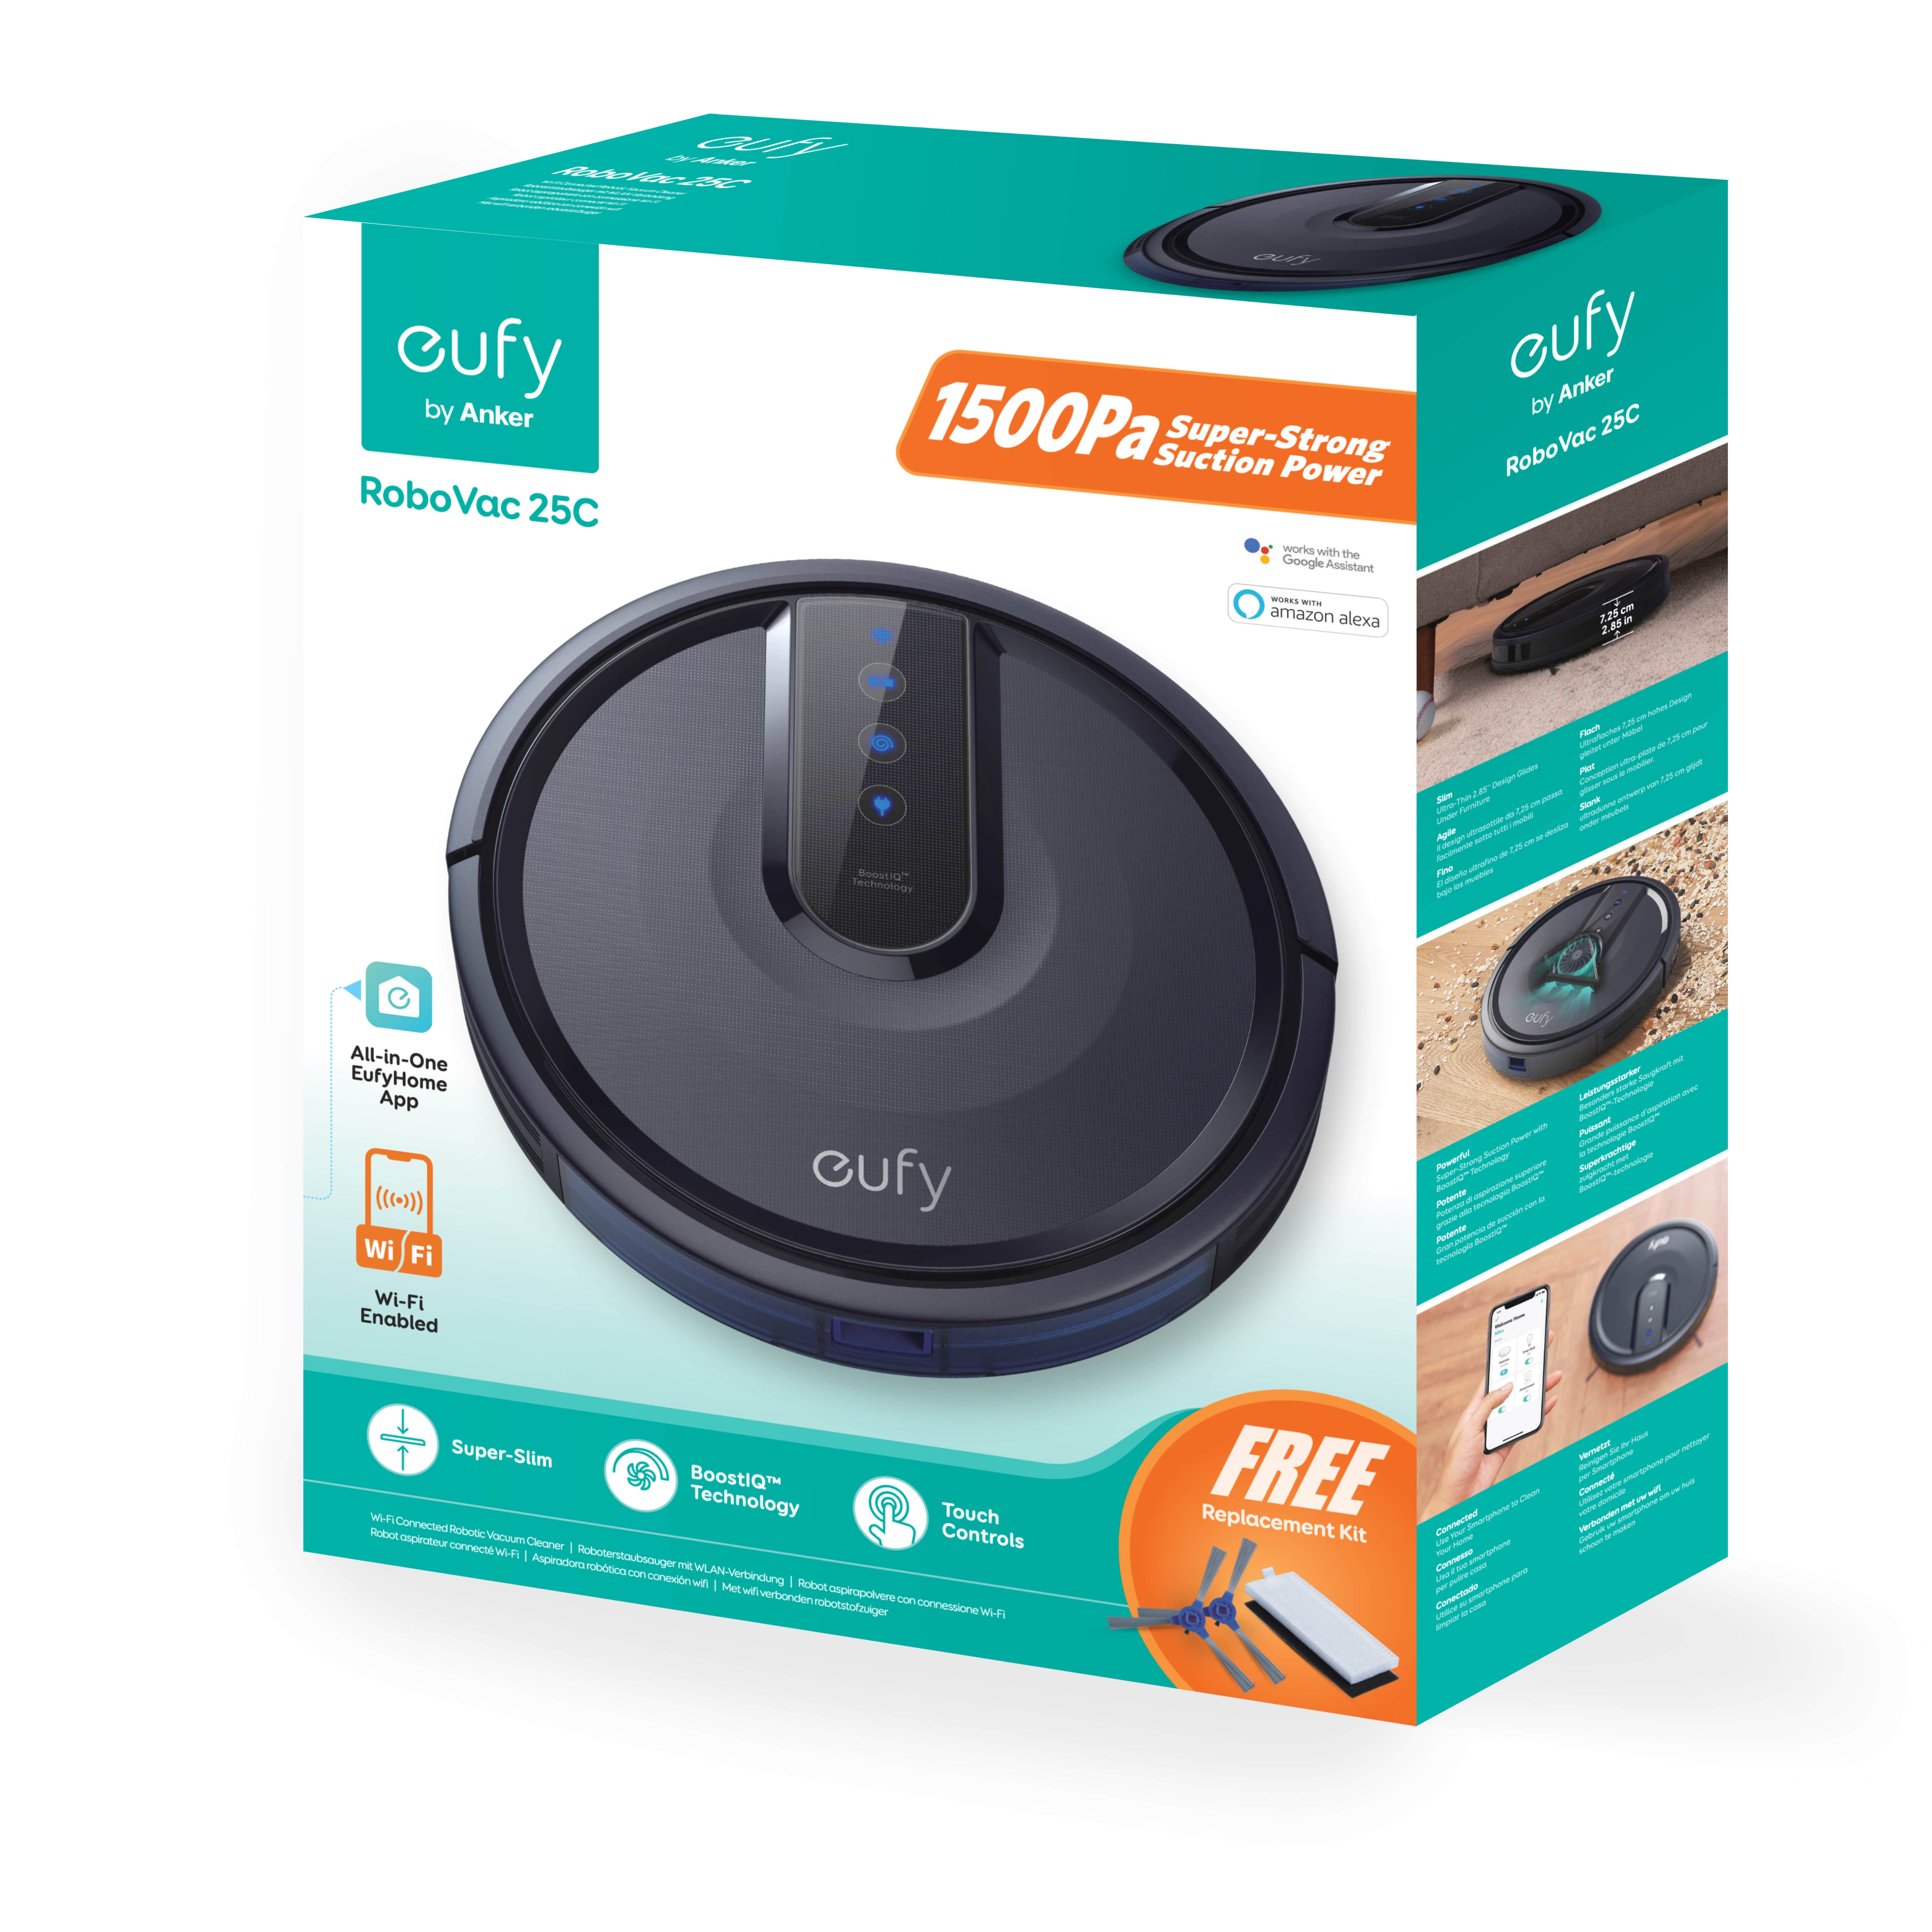 Anker eufy 25C Wi-Fi Connected Robot Vacuum, Great for Picking up Pet Hairs, Quiet, Slim - image 8 of 9